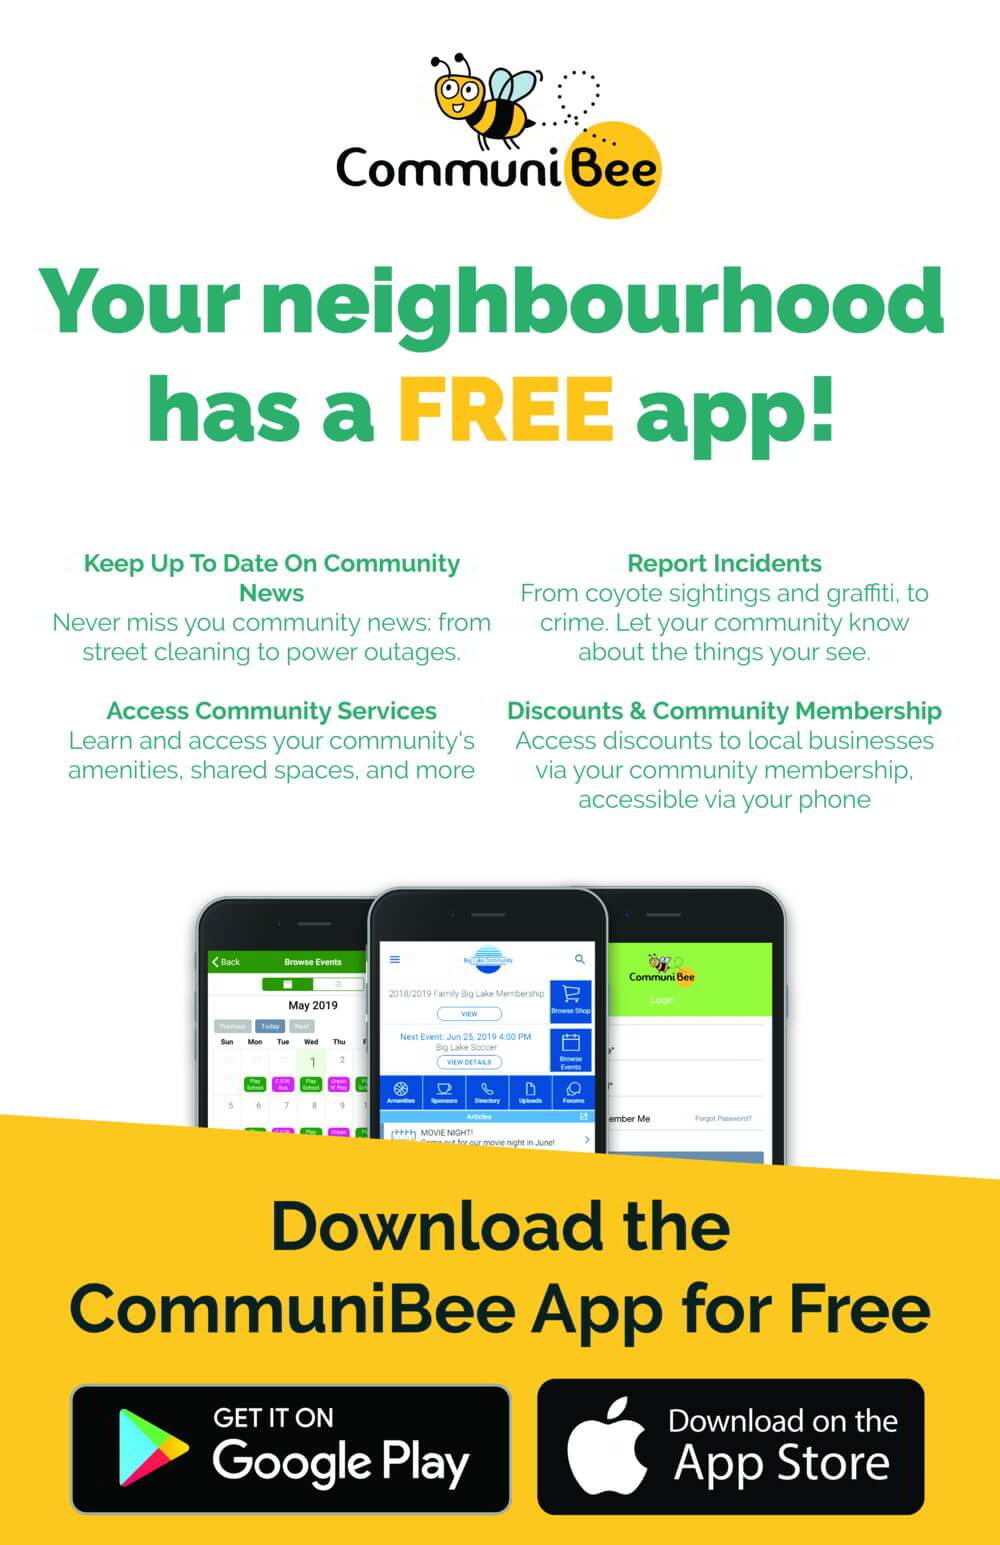 Image of a CommuniBee poster advertising the free app and its benfits.